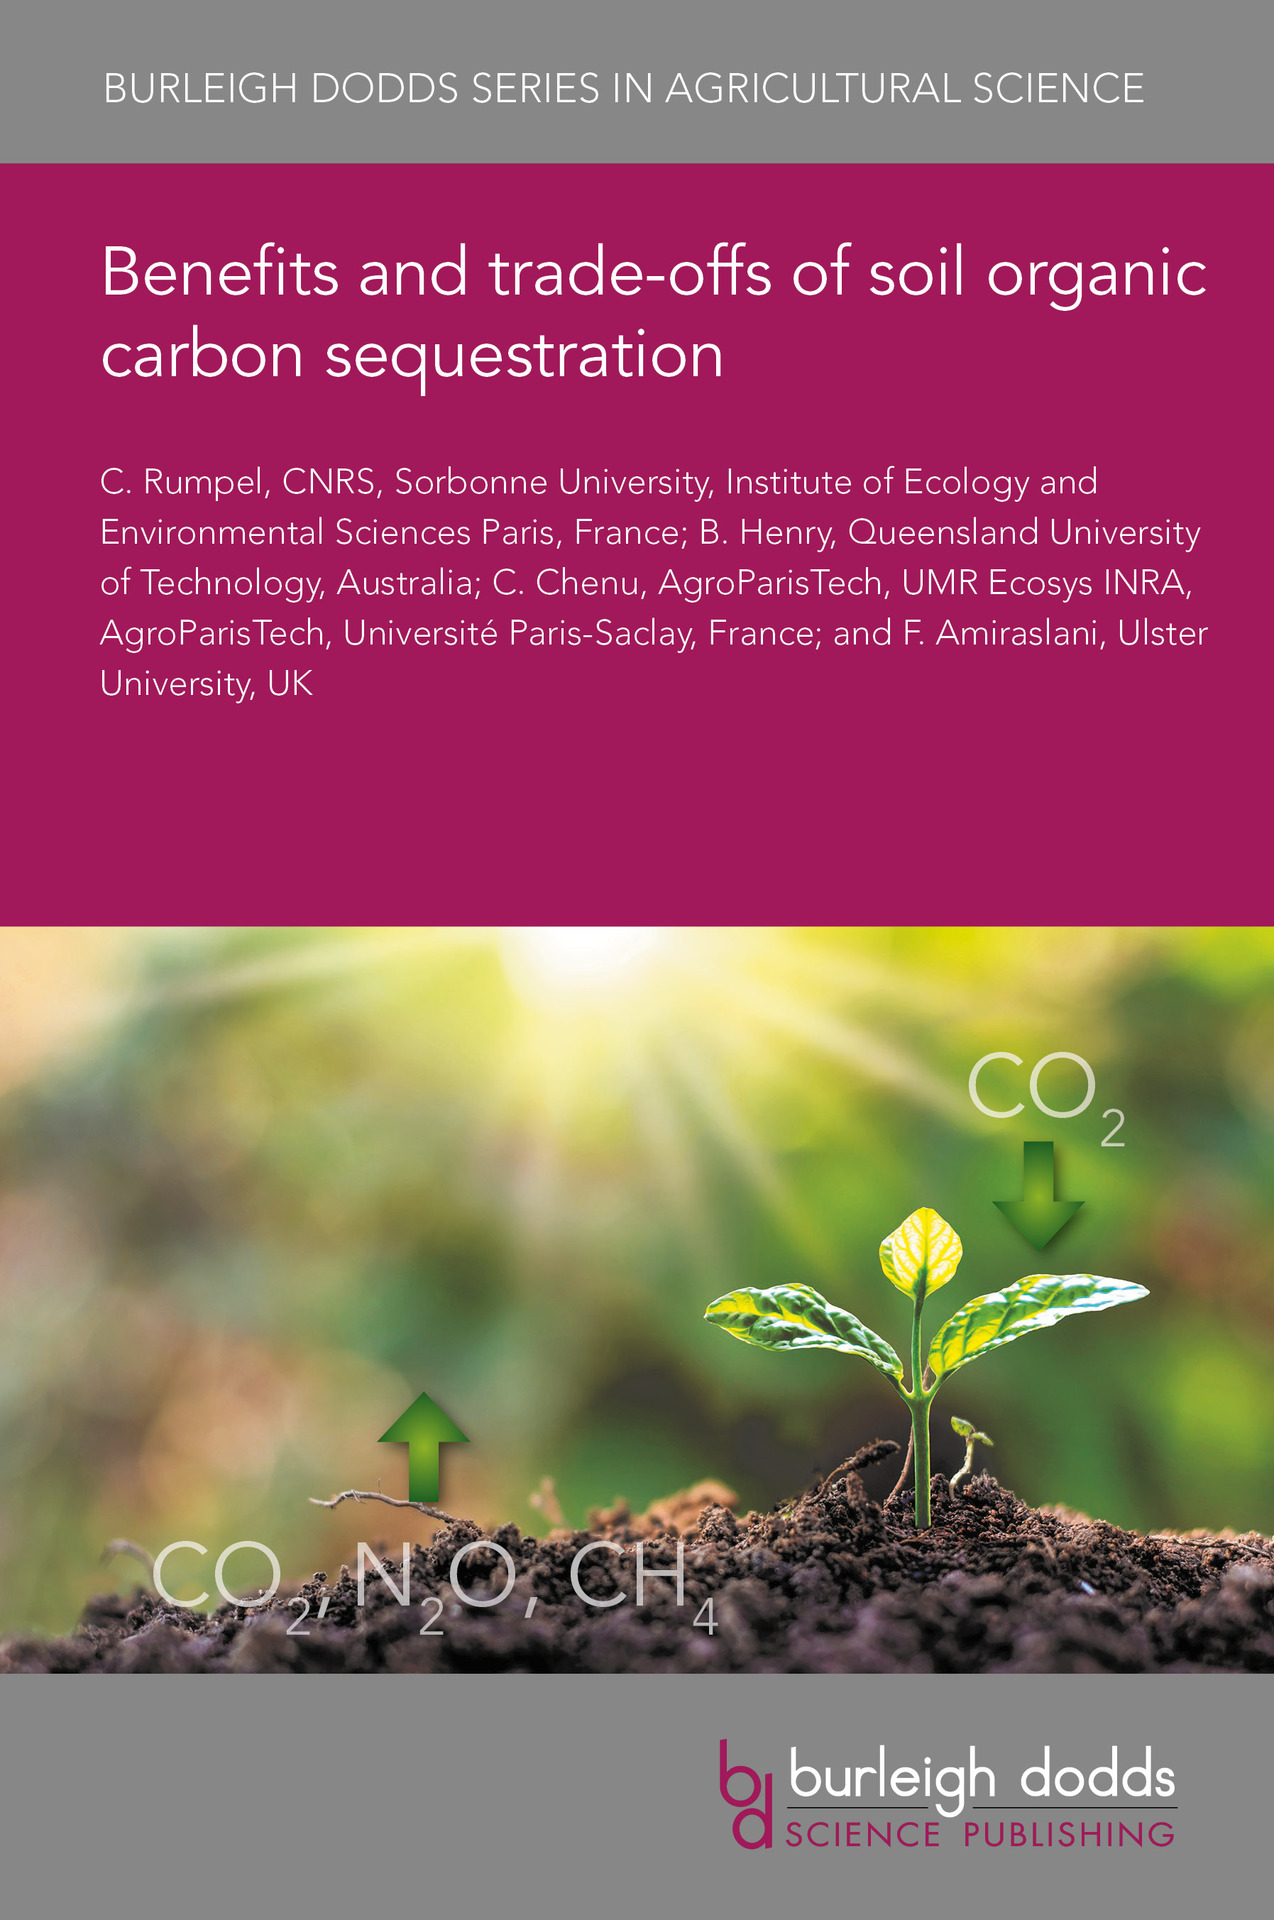 Benefits and trade-offs of soil organic carbon sequestration